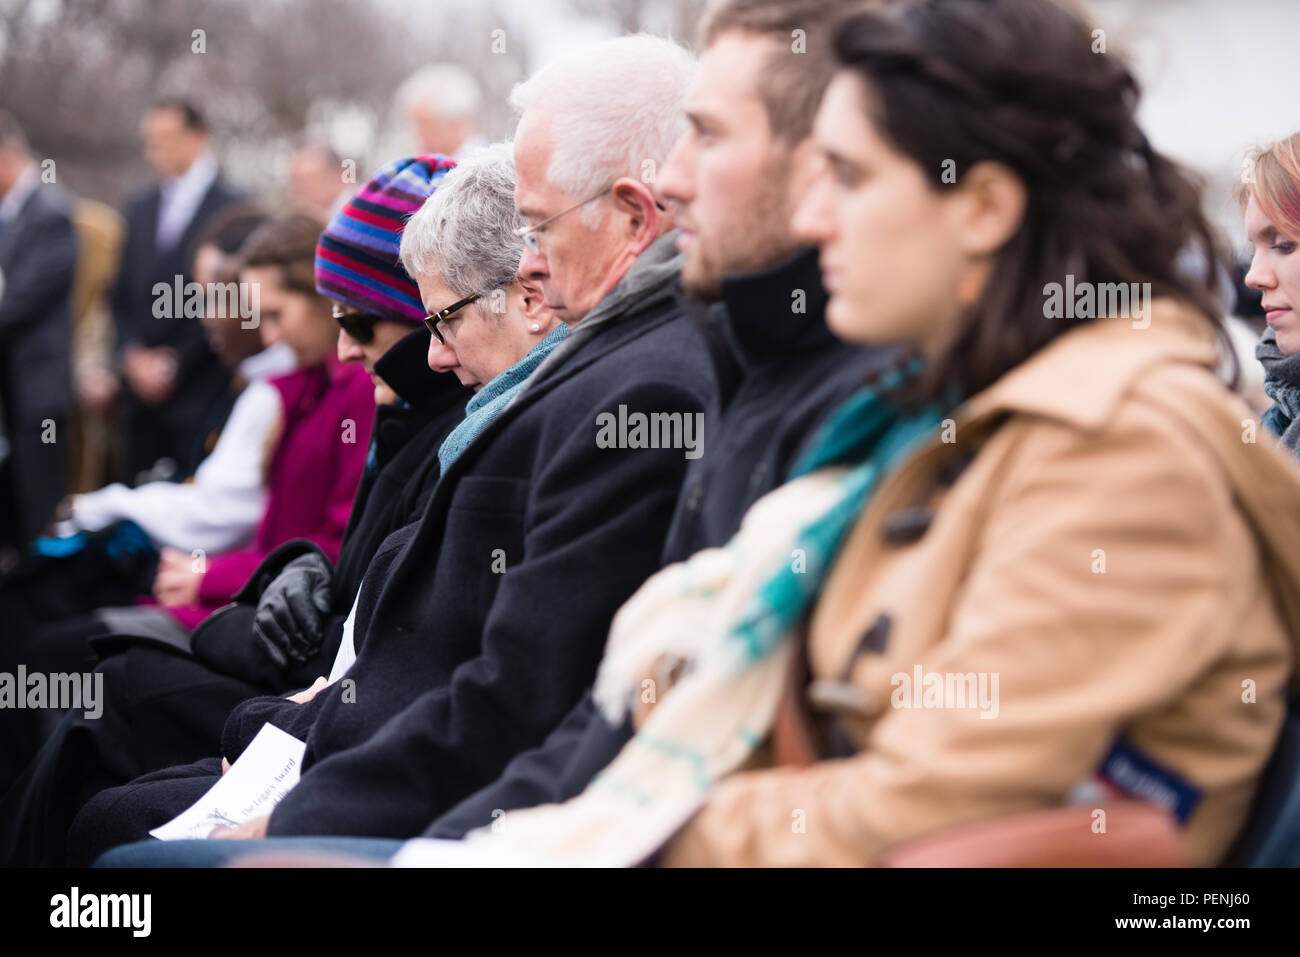 Attendees listen to speakers during the Pan Am Flight 103 memorial ceremony in Arlington National Cemetery, Dec. 21, 2015, in Arlington, Va. A terrorist’s bomb destroyed the aircraft 27 years ago, in what became known as the “Lockerbie bombing,” killing 243 passengers, 16 crew members and 11 people on the ground. (U.S. Army photo by Rachel Larue/Arlington National Cemetery/released) Stock Photo